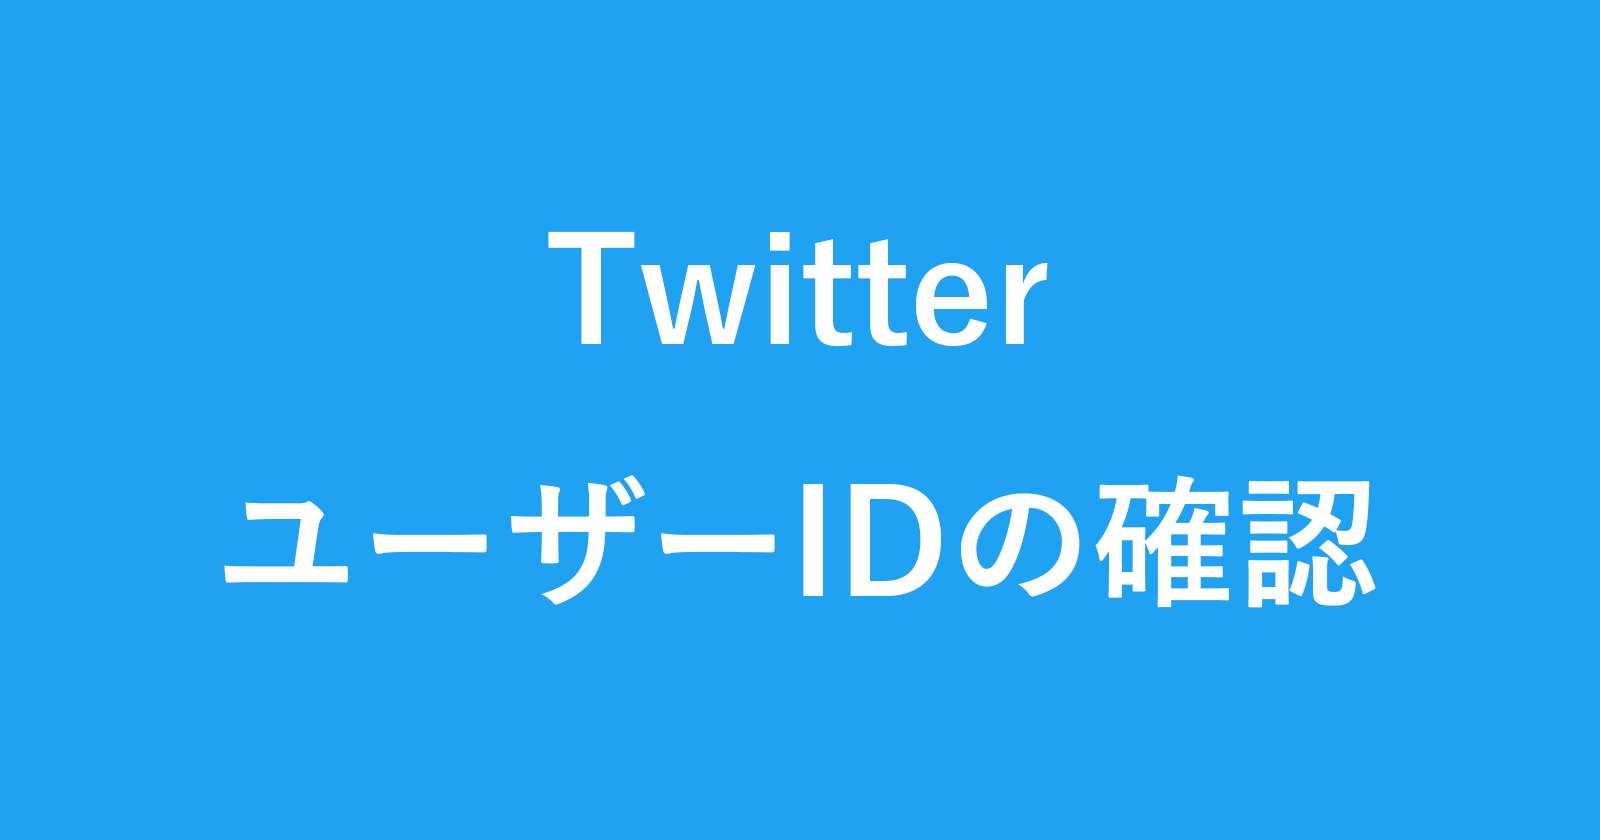 twitter user id number